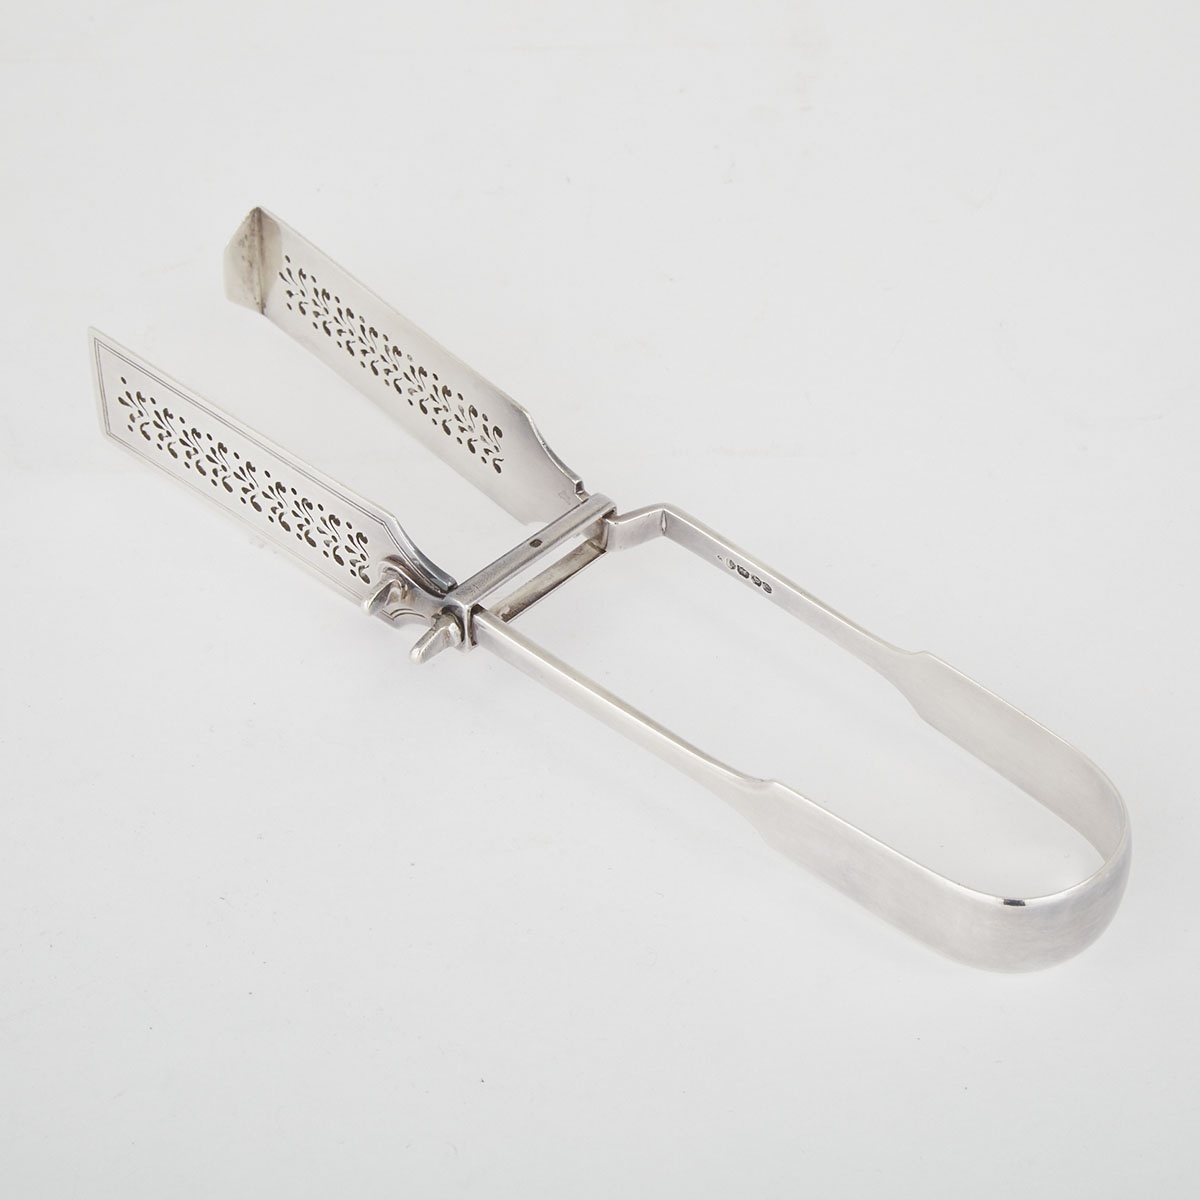 Victorian Silver Fiddle Pattern Asparagus Tongs, William Eaton, London, 1838